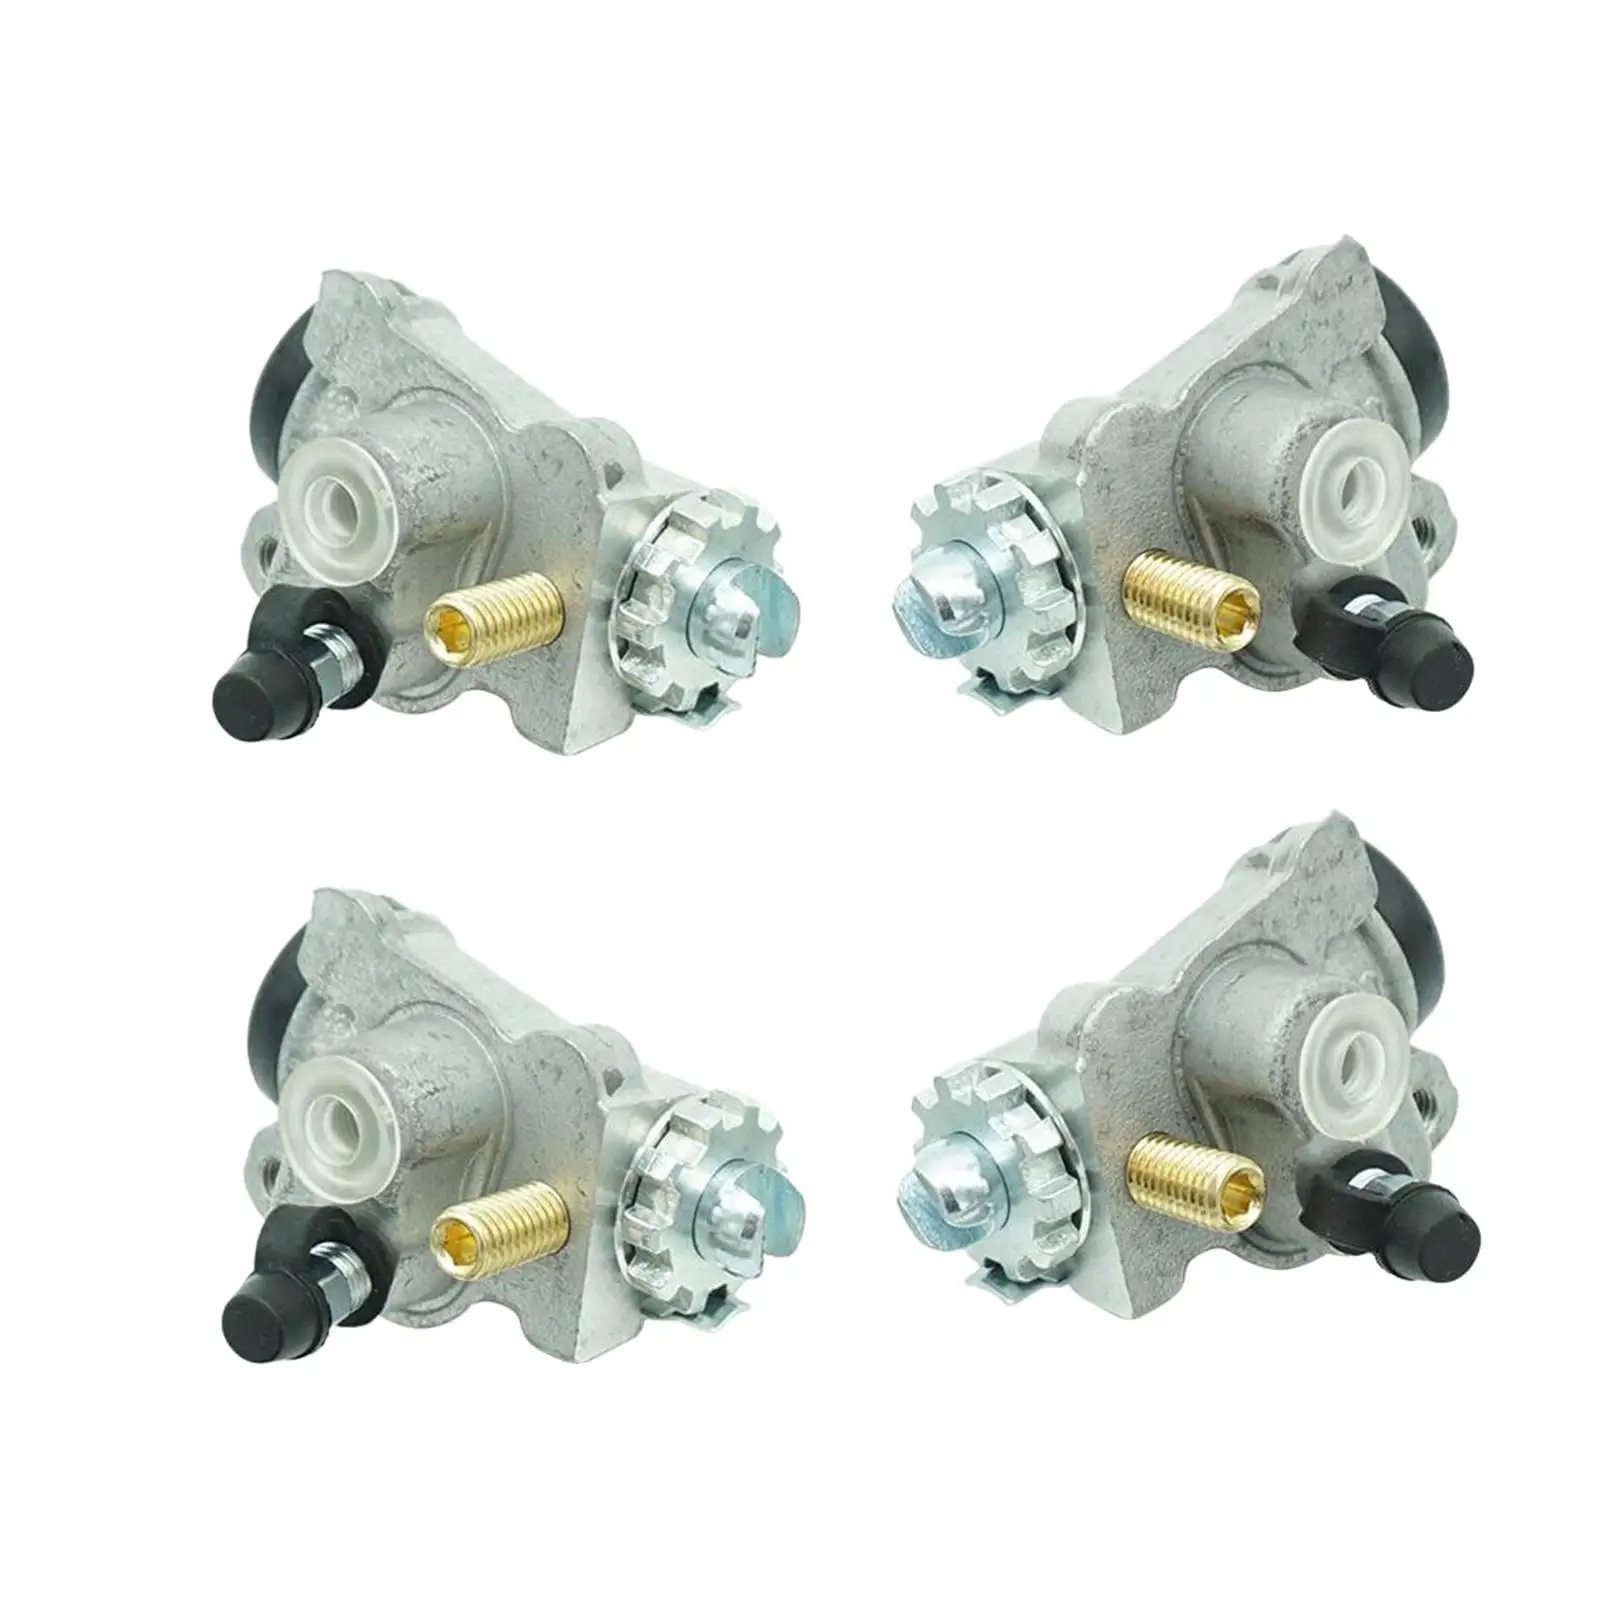 4 Pieces Front Brake Wheel Cylinders for Honda Foreman 450 Easy Installation